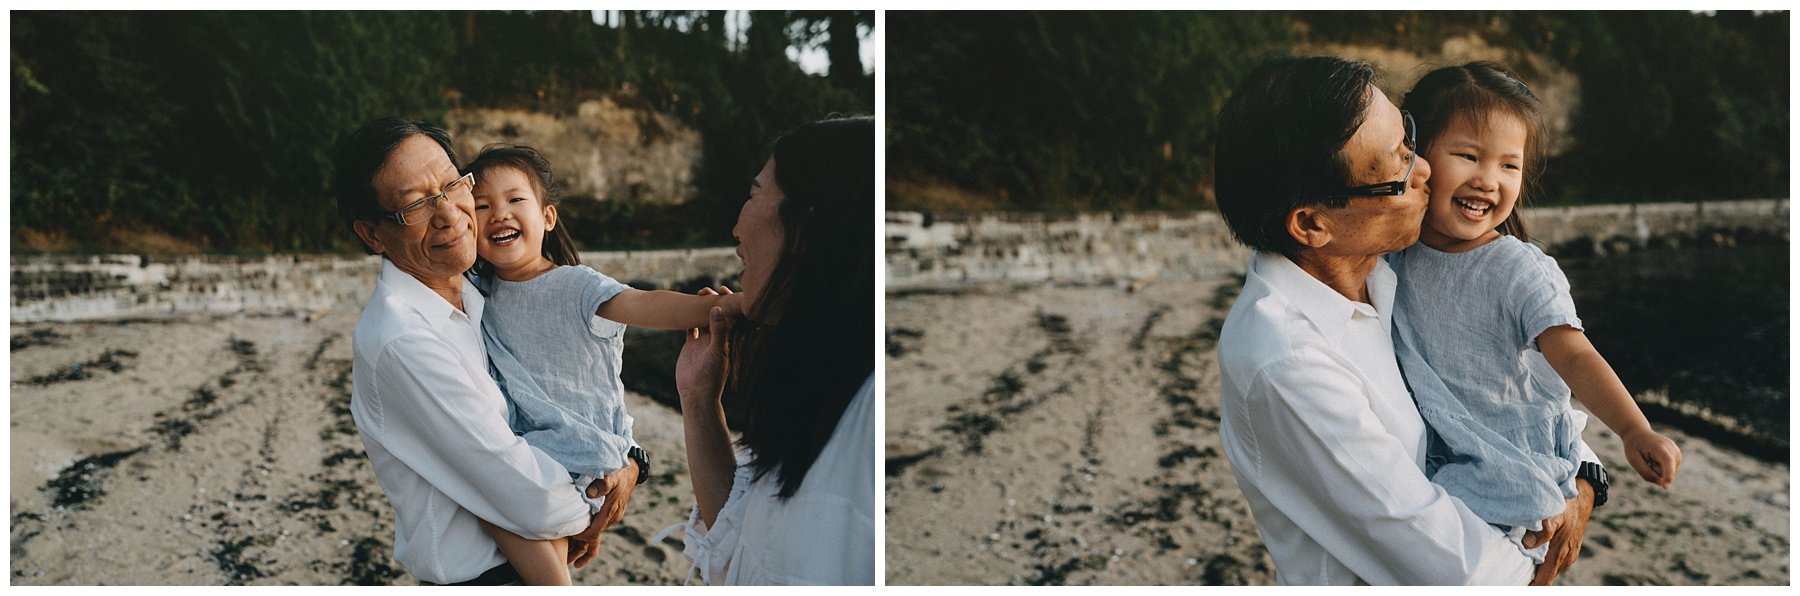 Vancouver Family Photographer || Stanley Park Family photographer || Jayme Lang Photographer_4276.jpg